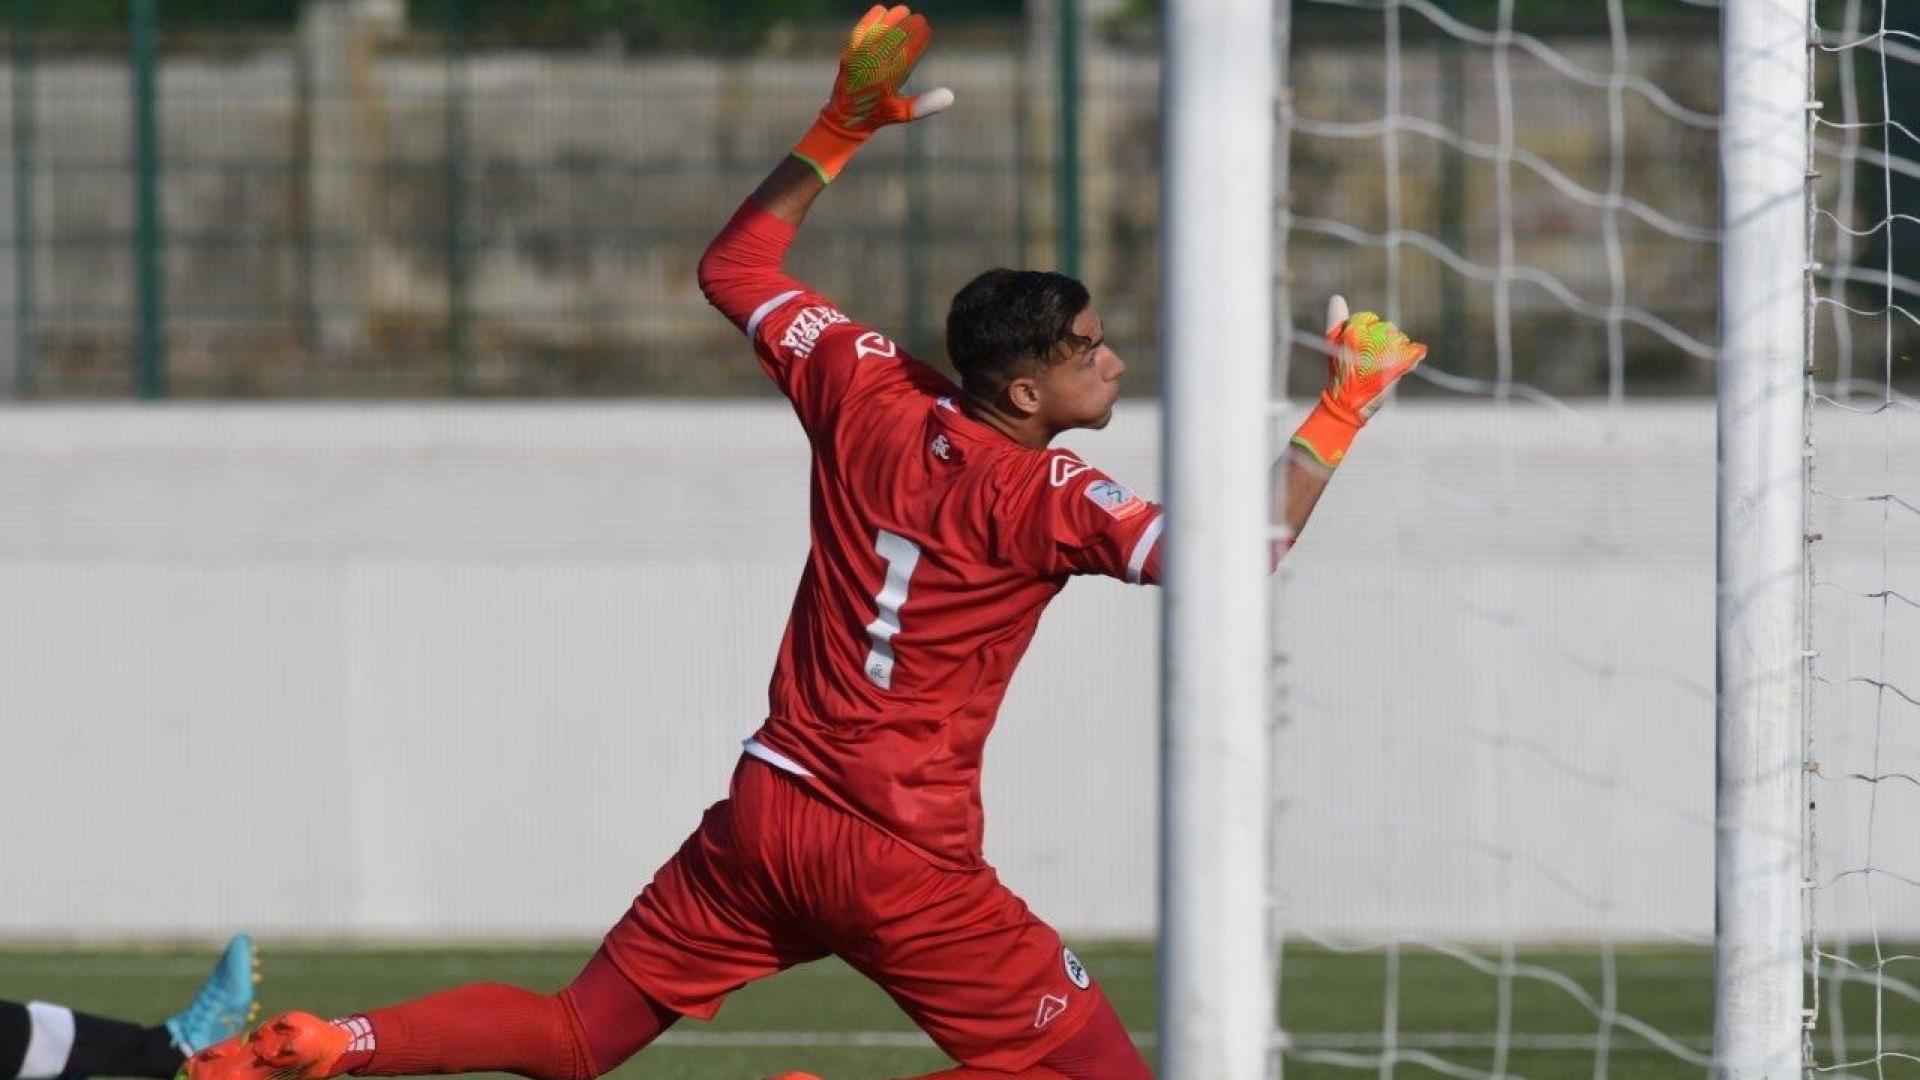 Francesco Plaia called up to the Under17 national team